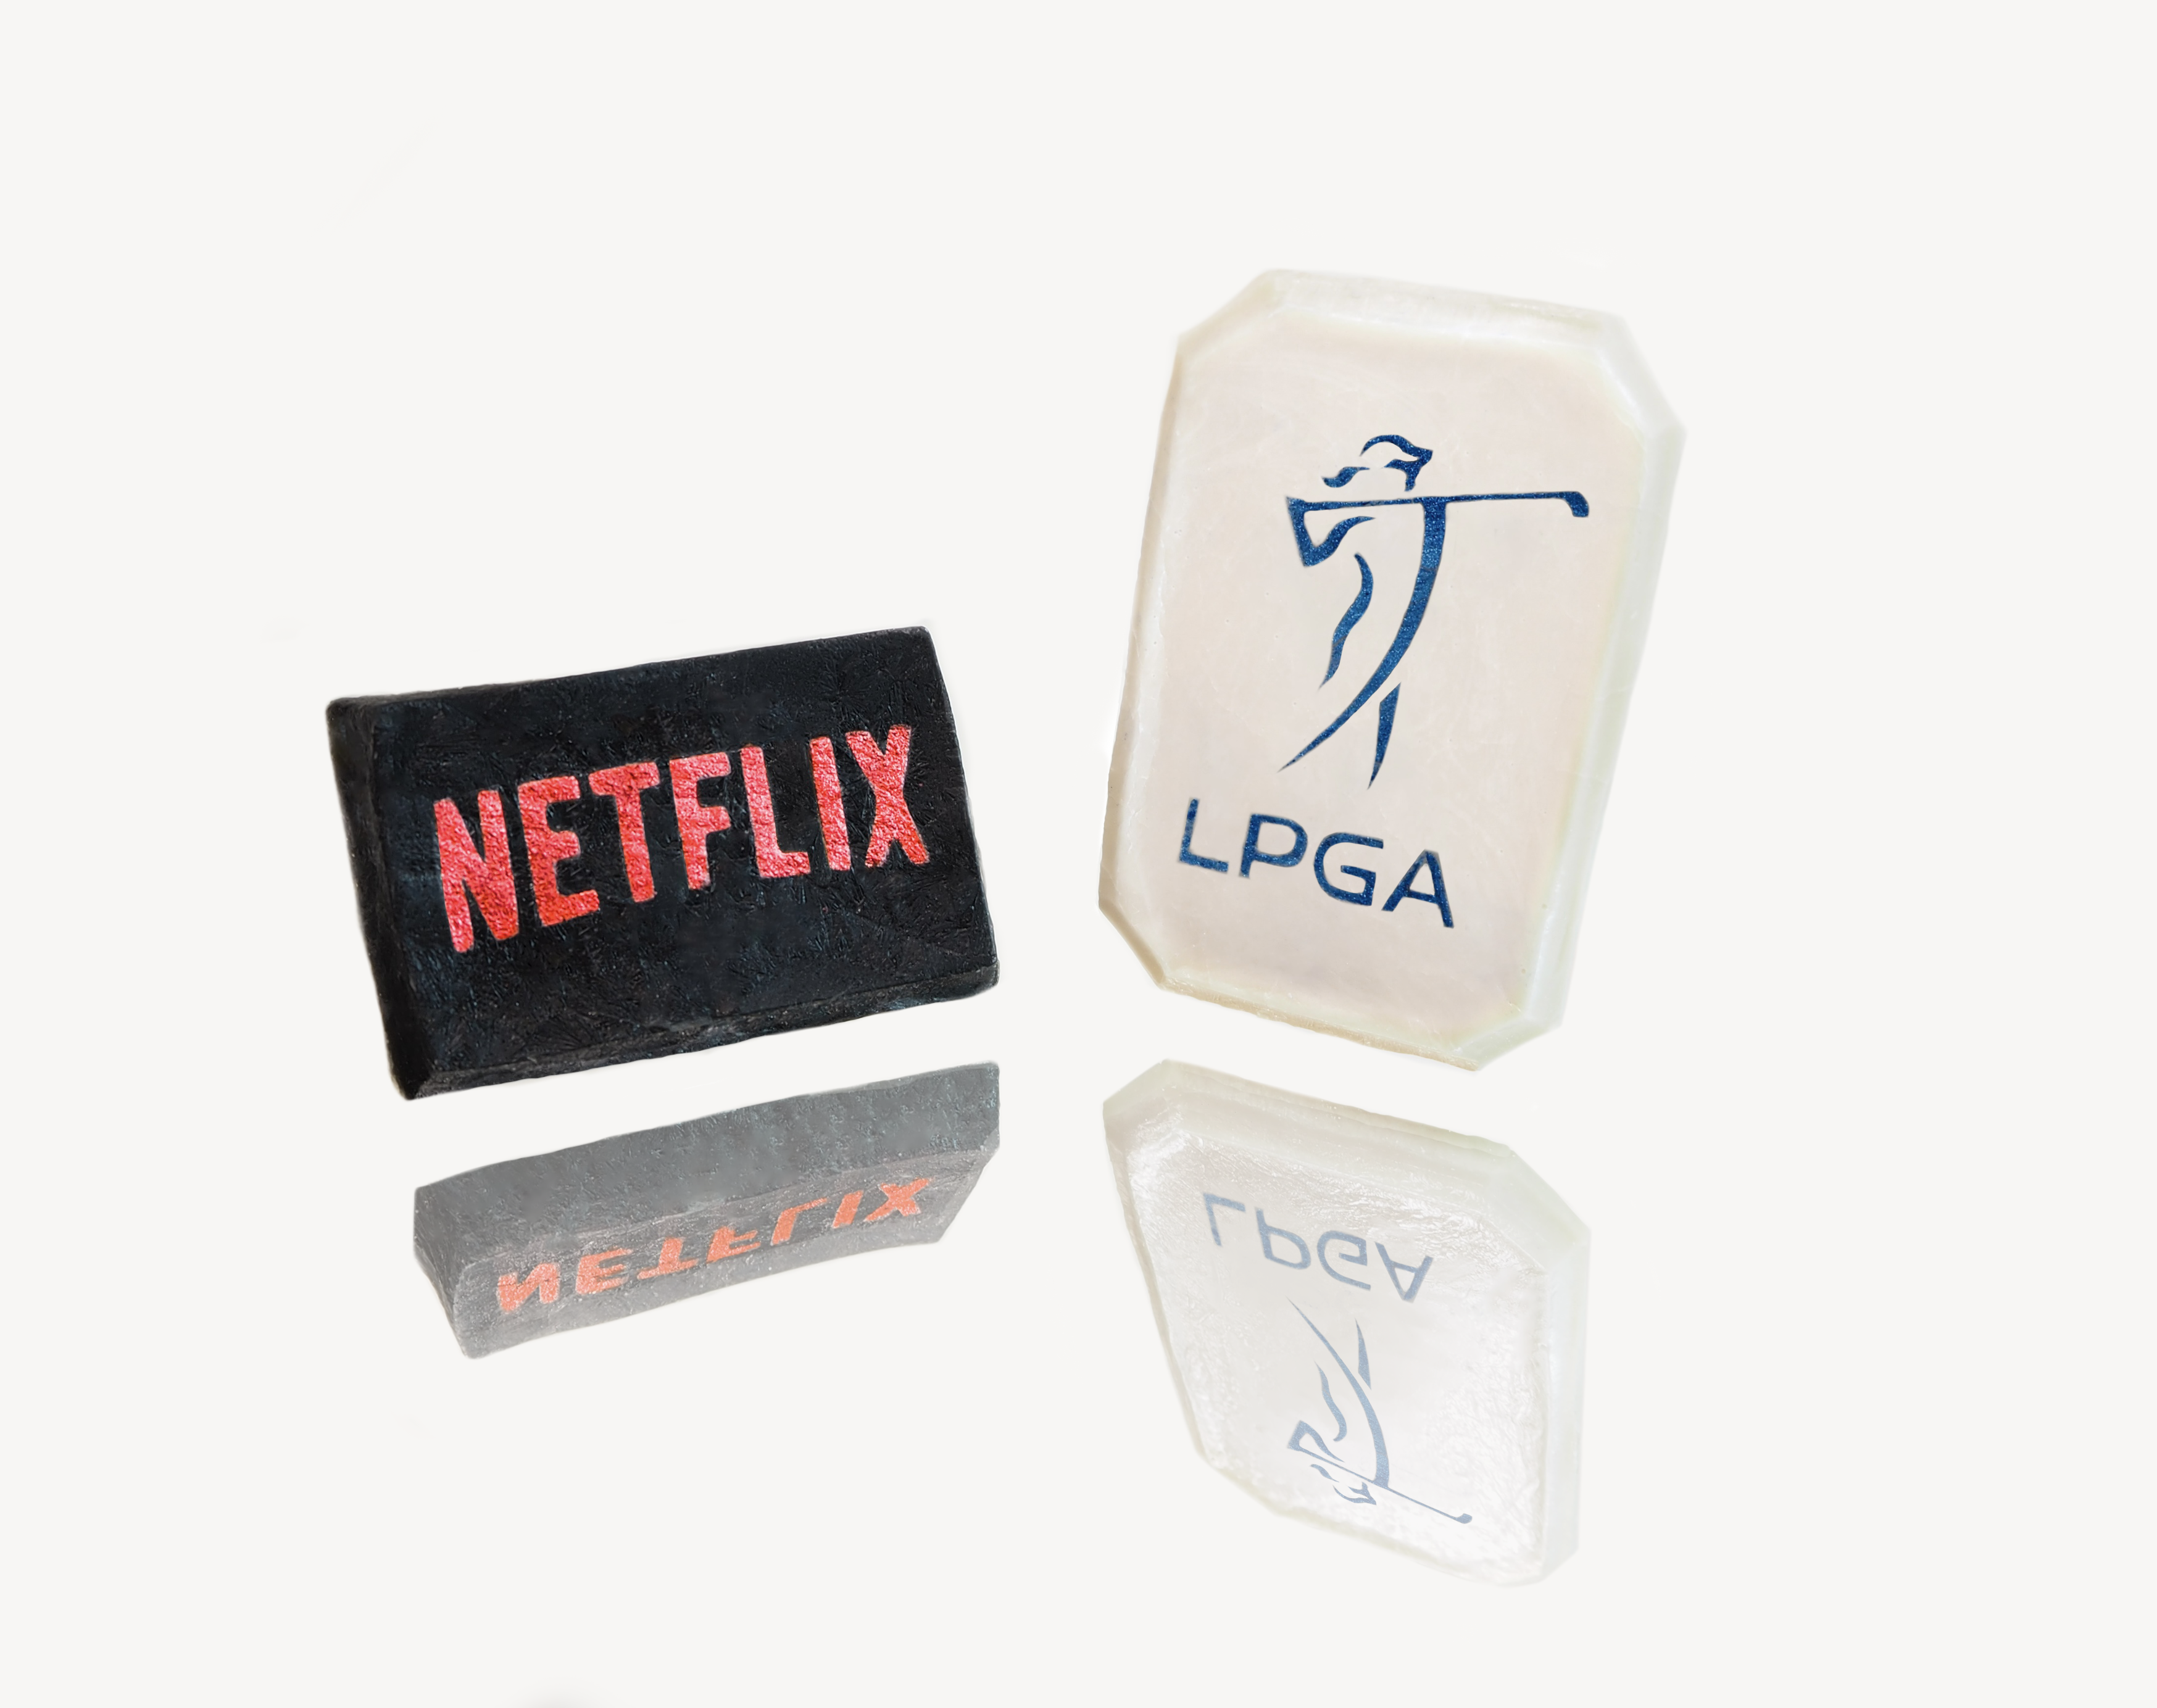 Two fabric patches and two novelty golf-themed sweets designed to resemble soap bars on a reflective surface. The black patch on the left features the 'NETFLIX' logo in red, and the sweets on the right are shaped like soap bars with the 'LPGA' logo in blue, with their reflections clearly visible beneath them